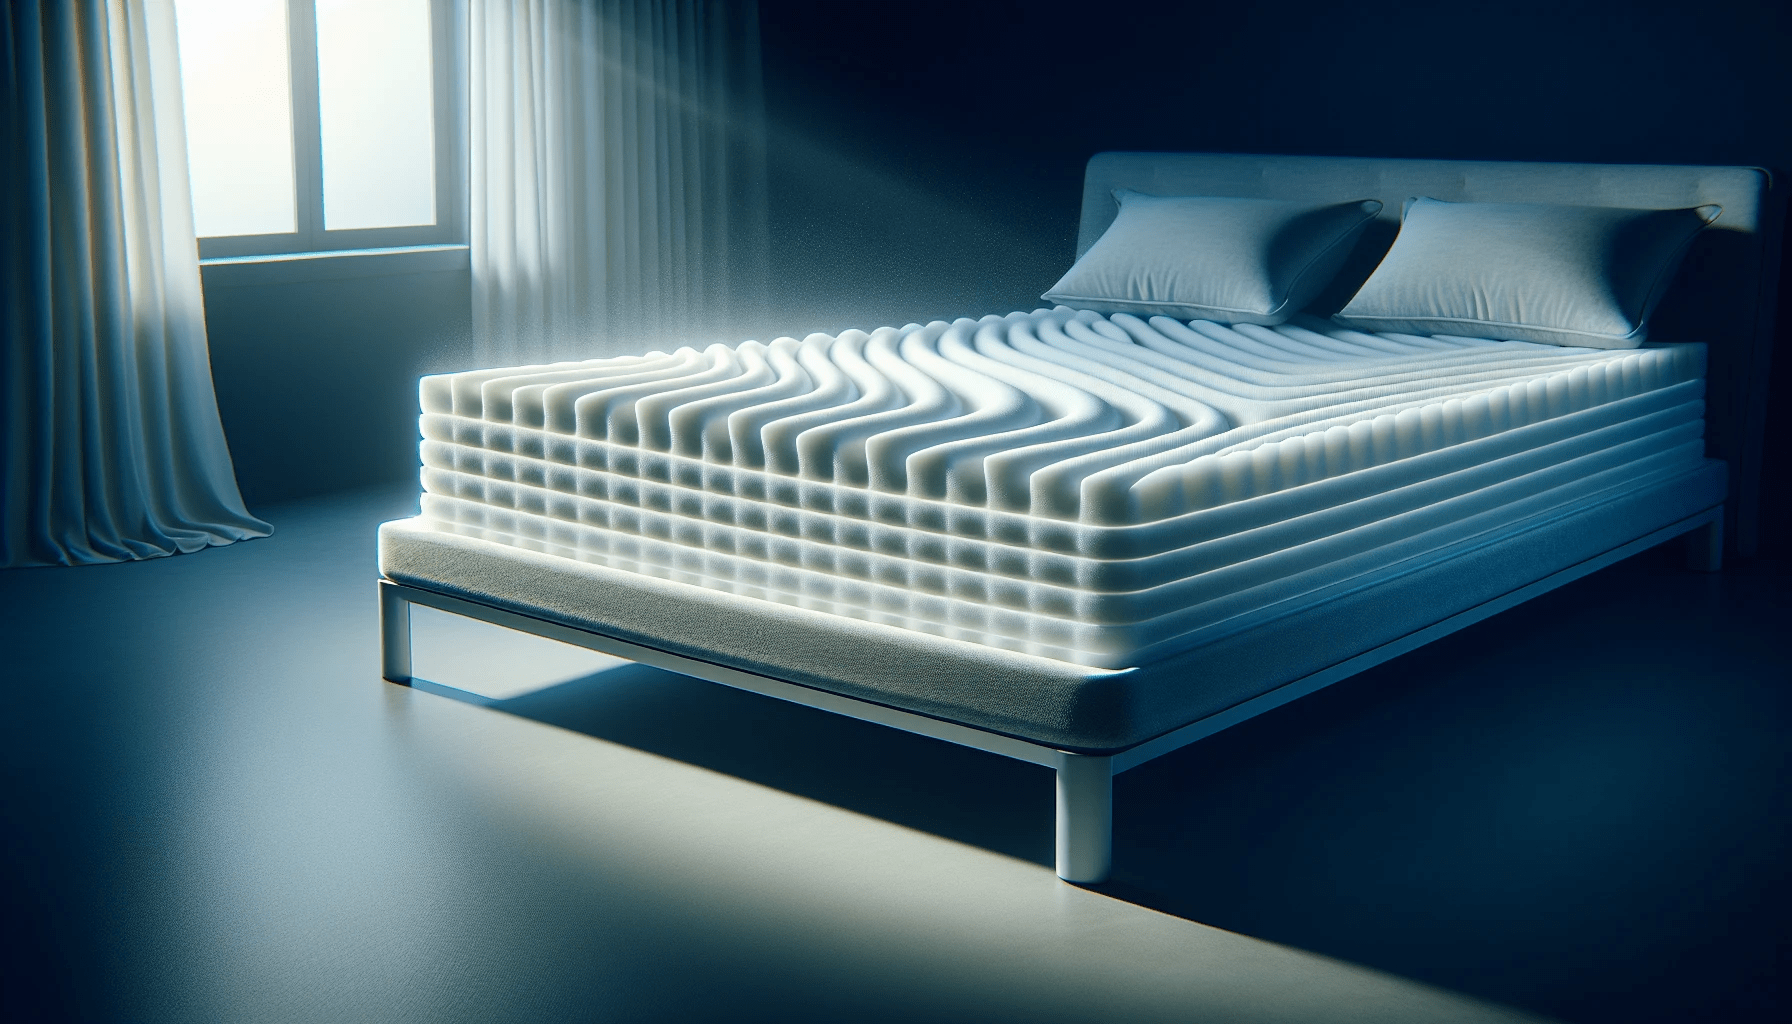 A comfortable and supportive mattress